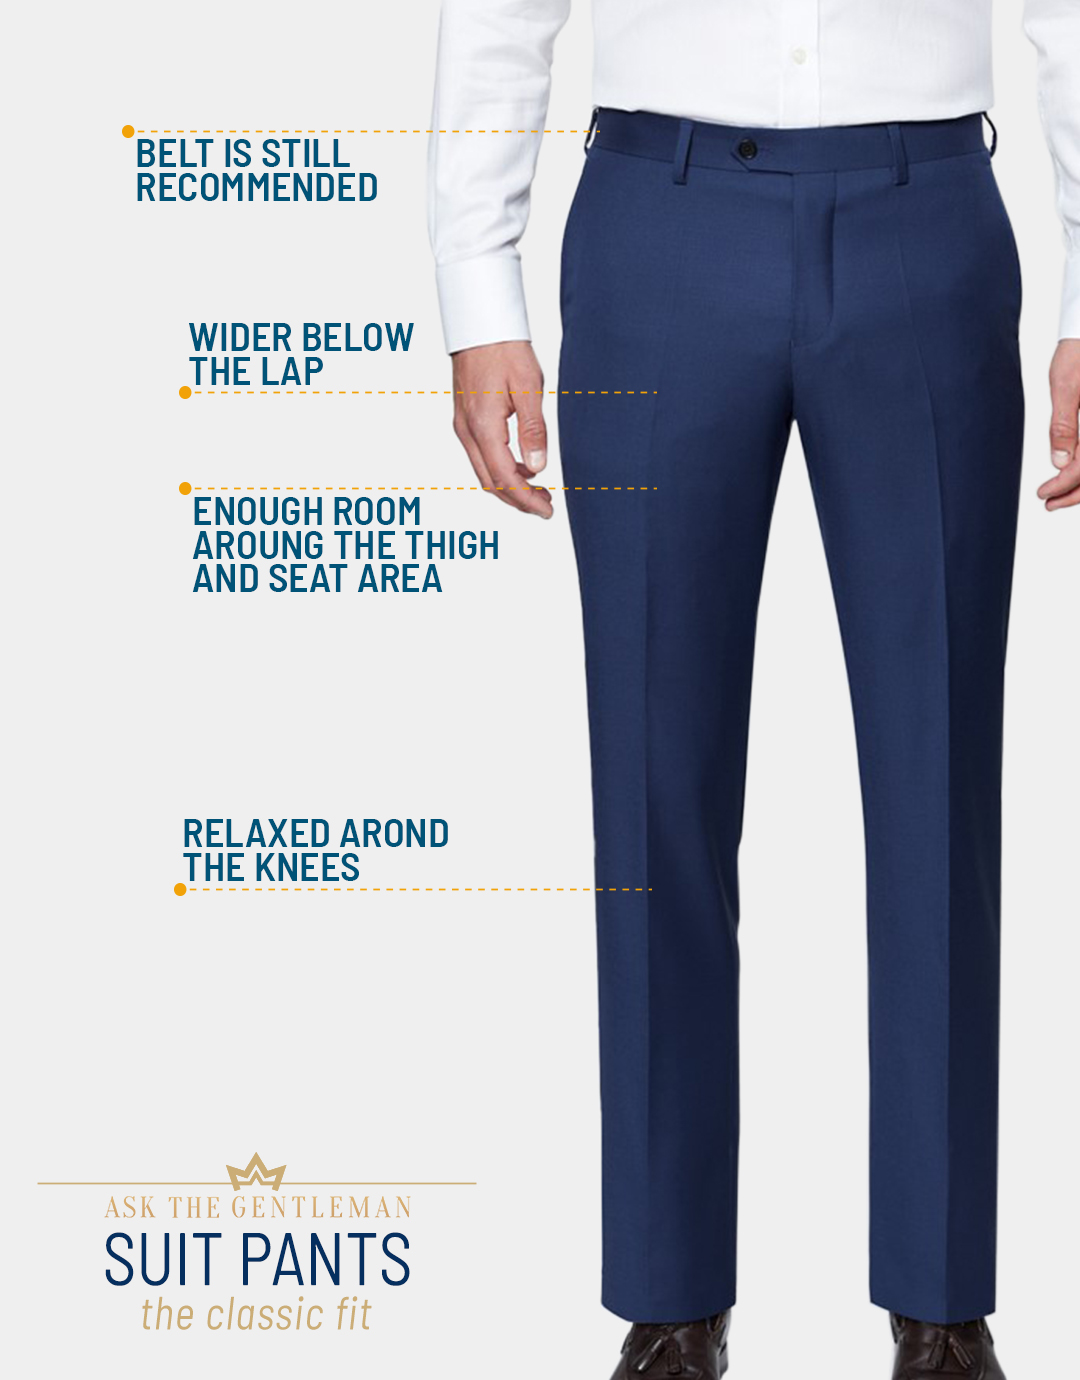 The features of a classic-fit suit pants cut